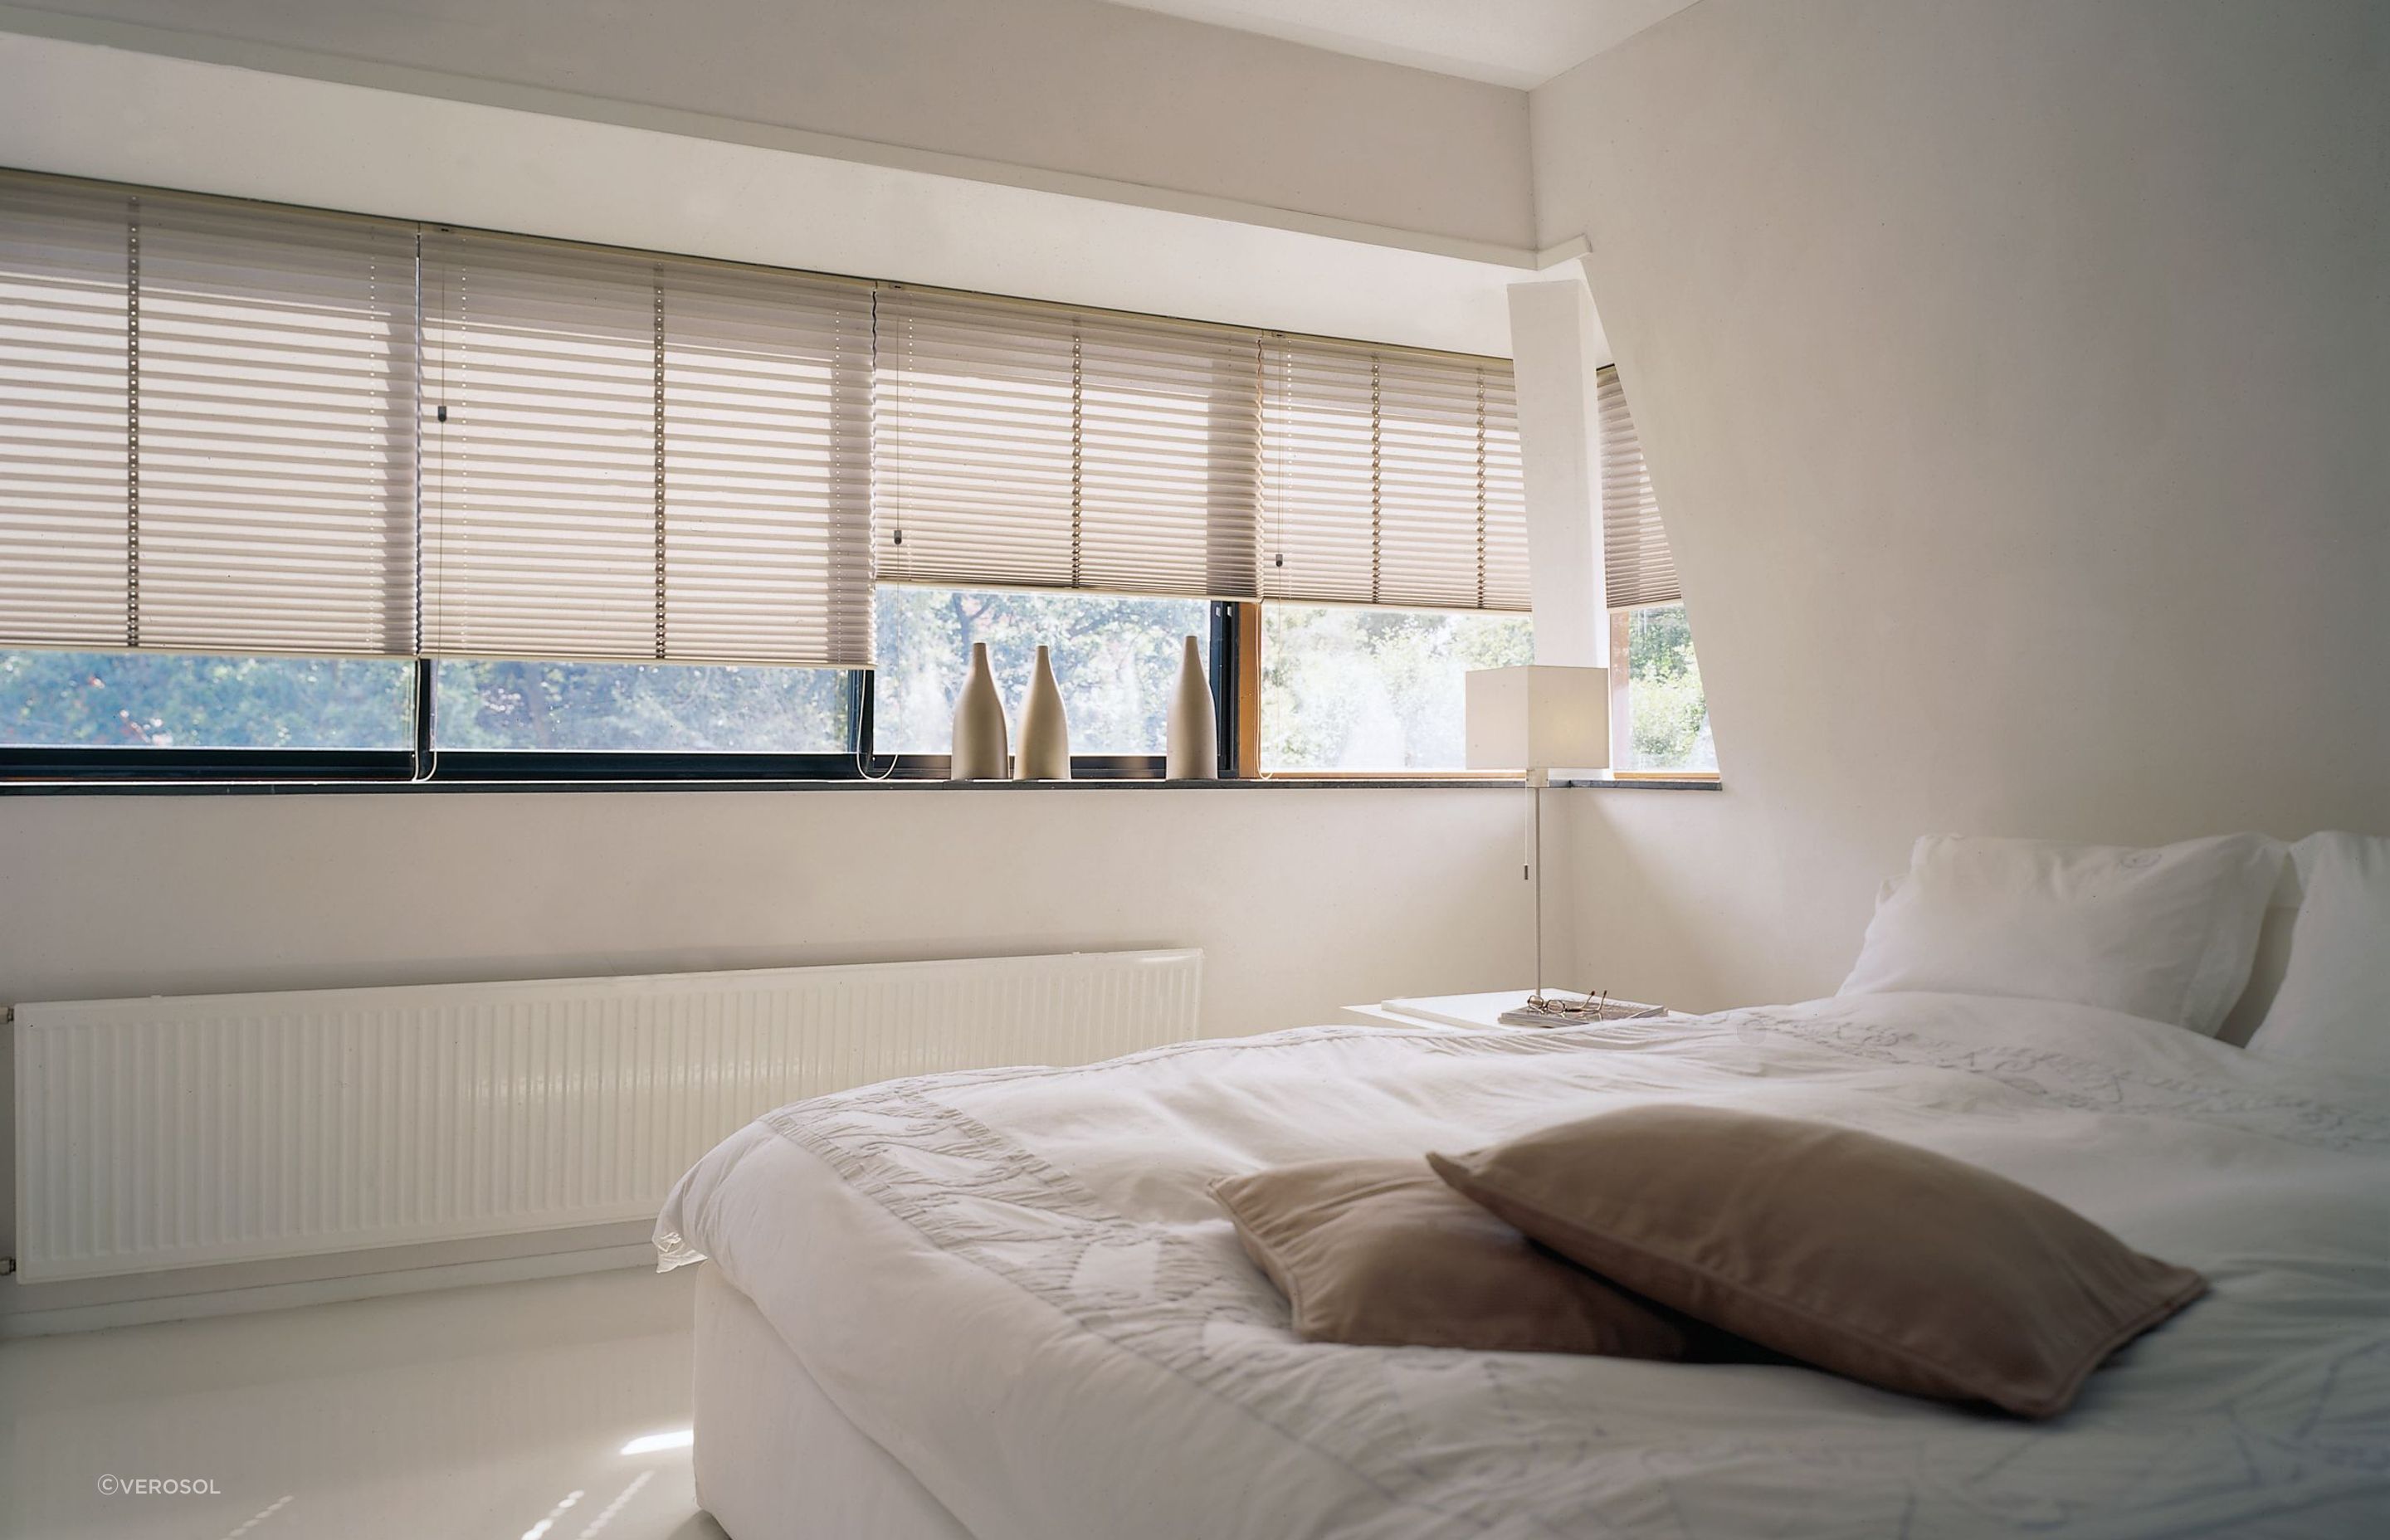 Smart window shades allow you to adjust light and privacy at the touch of a button.